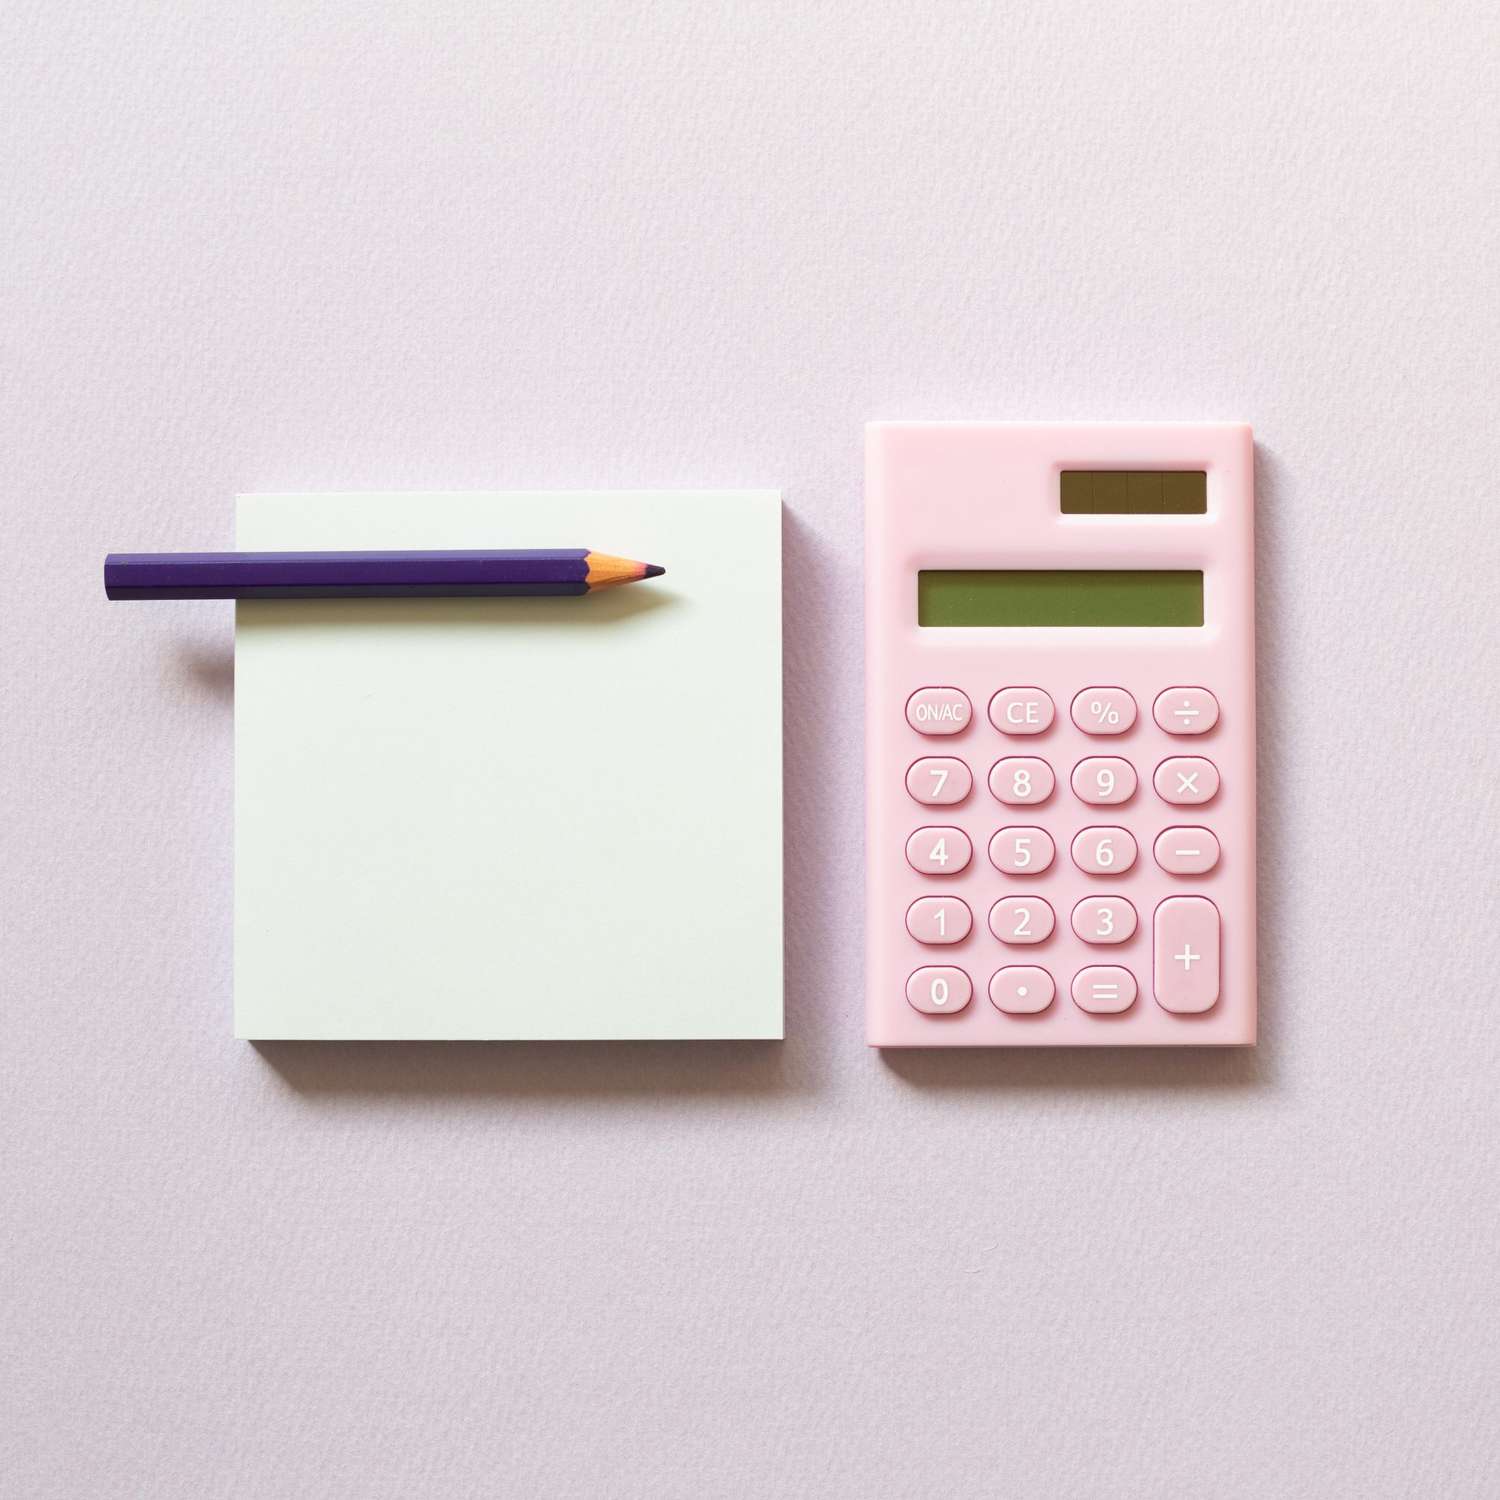 An image of memo paper, sticky notes and digital calculator with colored pencil on pink background.